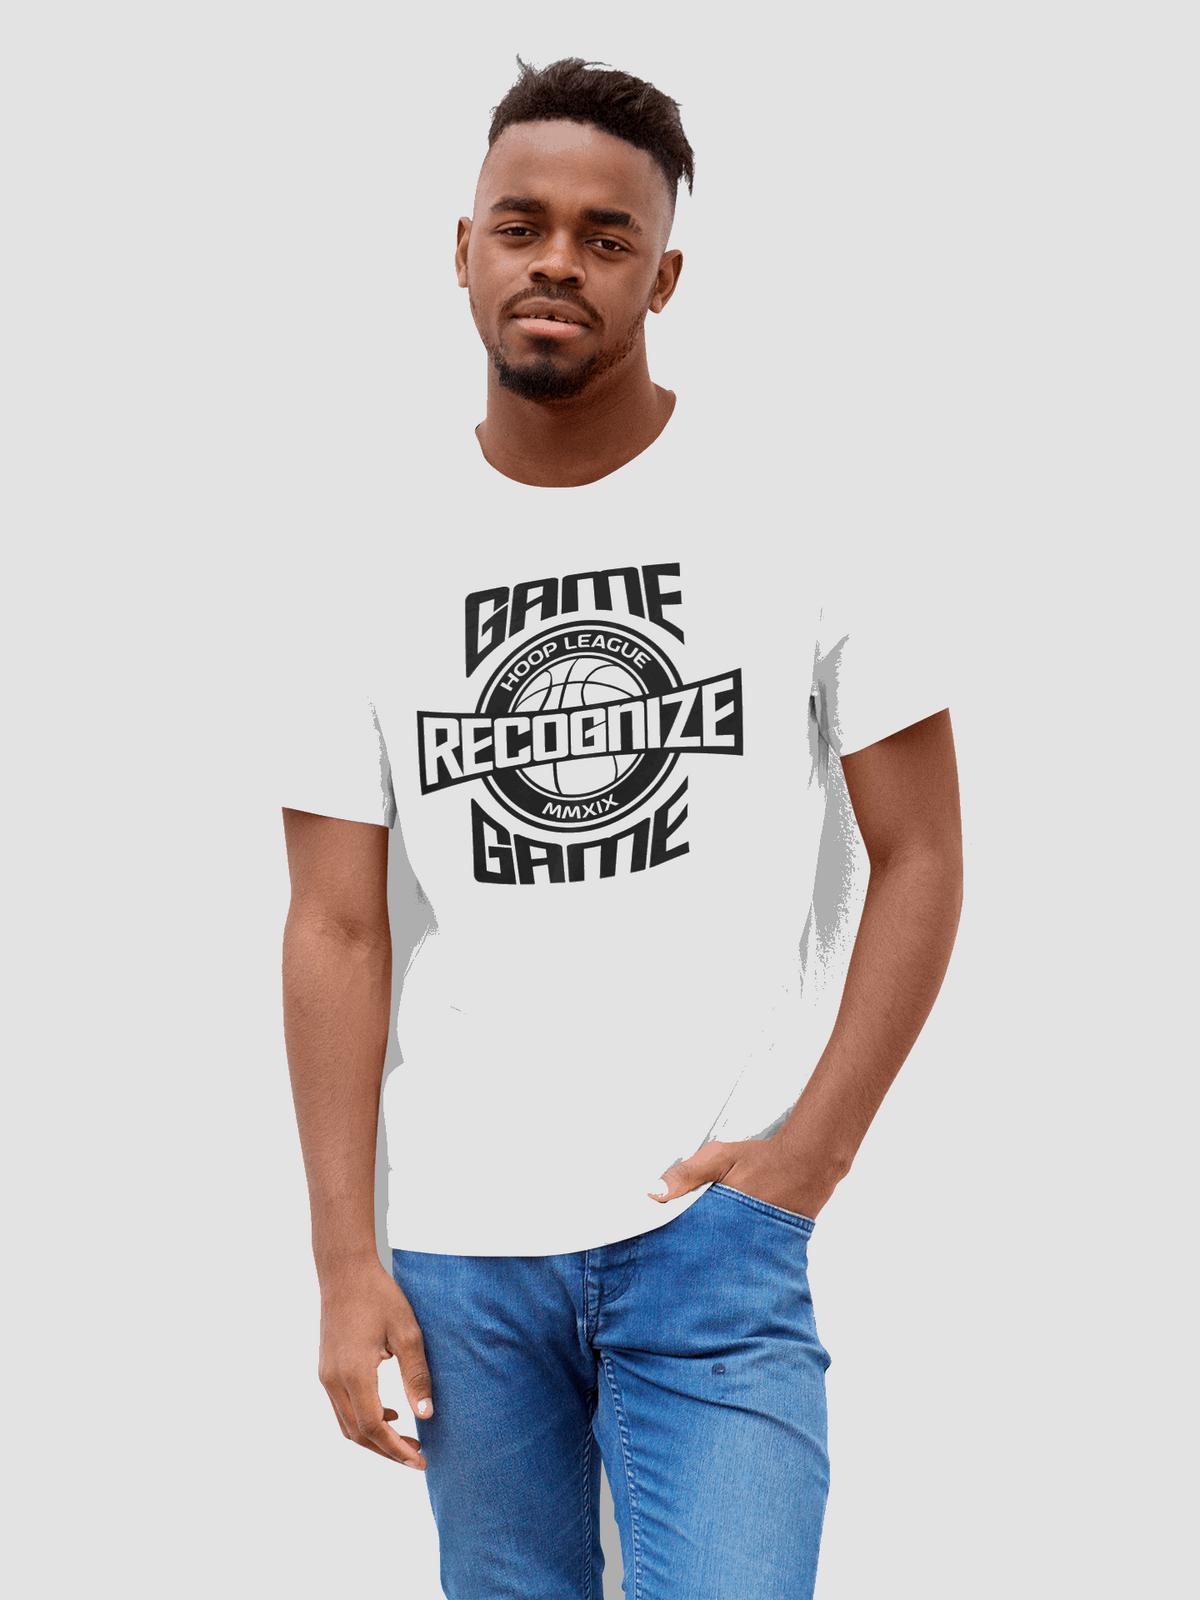 Game Recognize Game Eco Performance Tee - Hoop League 